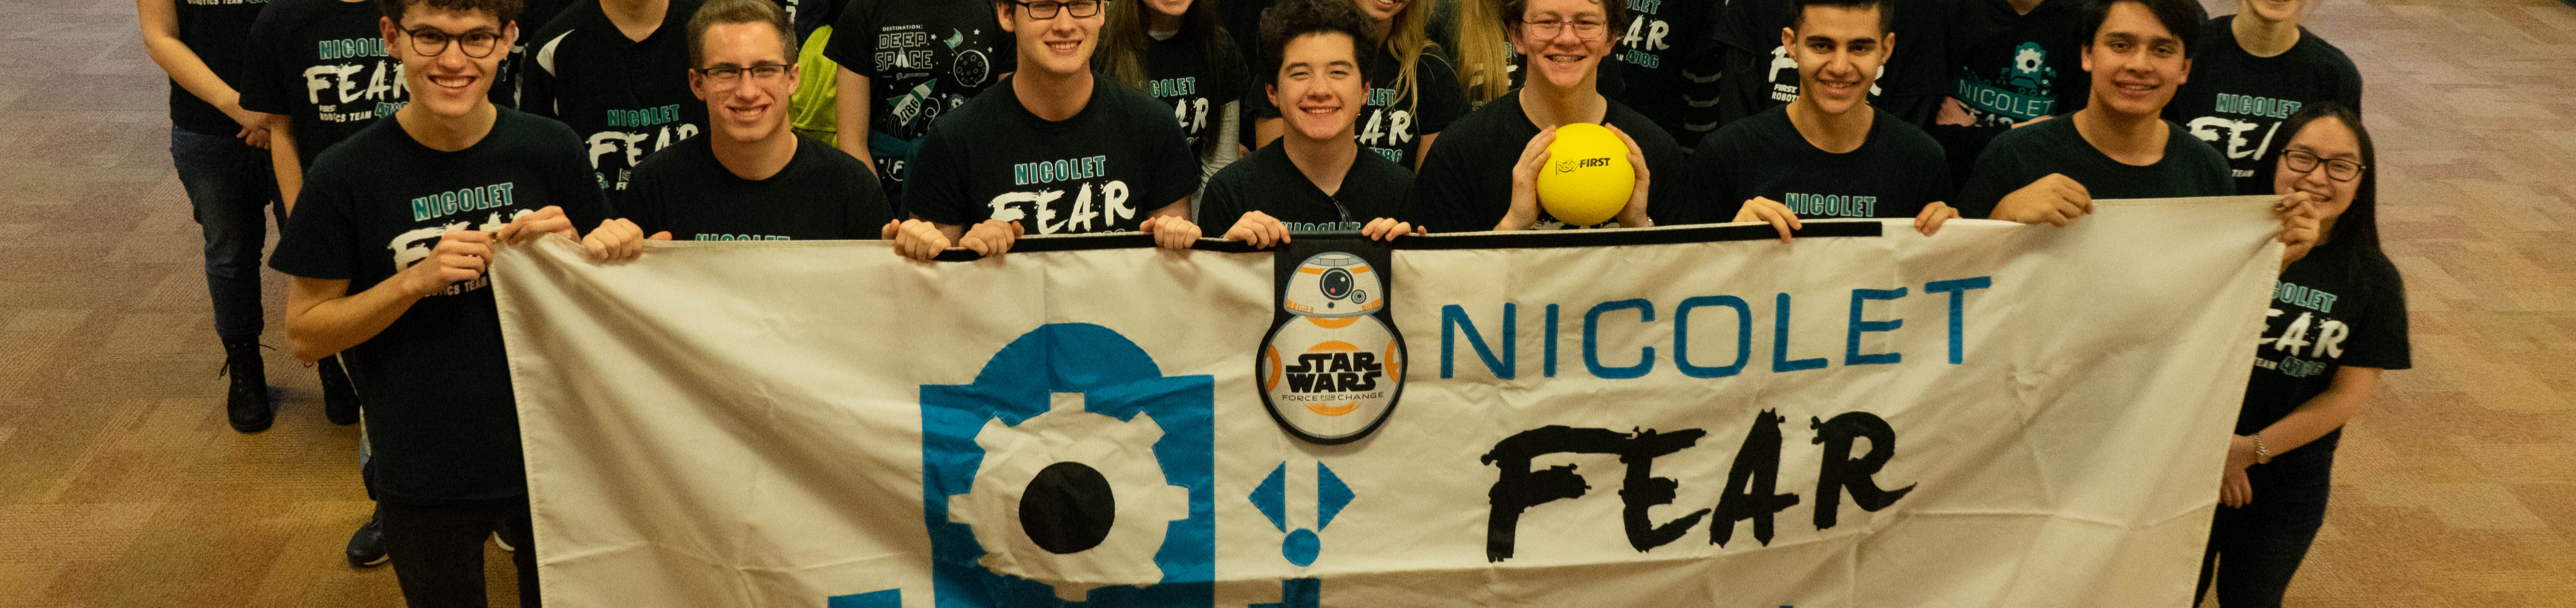 picture of students holding a nicolet fear sign